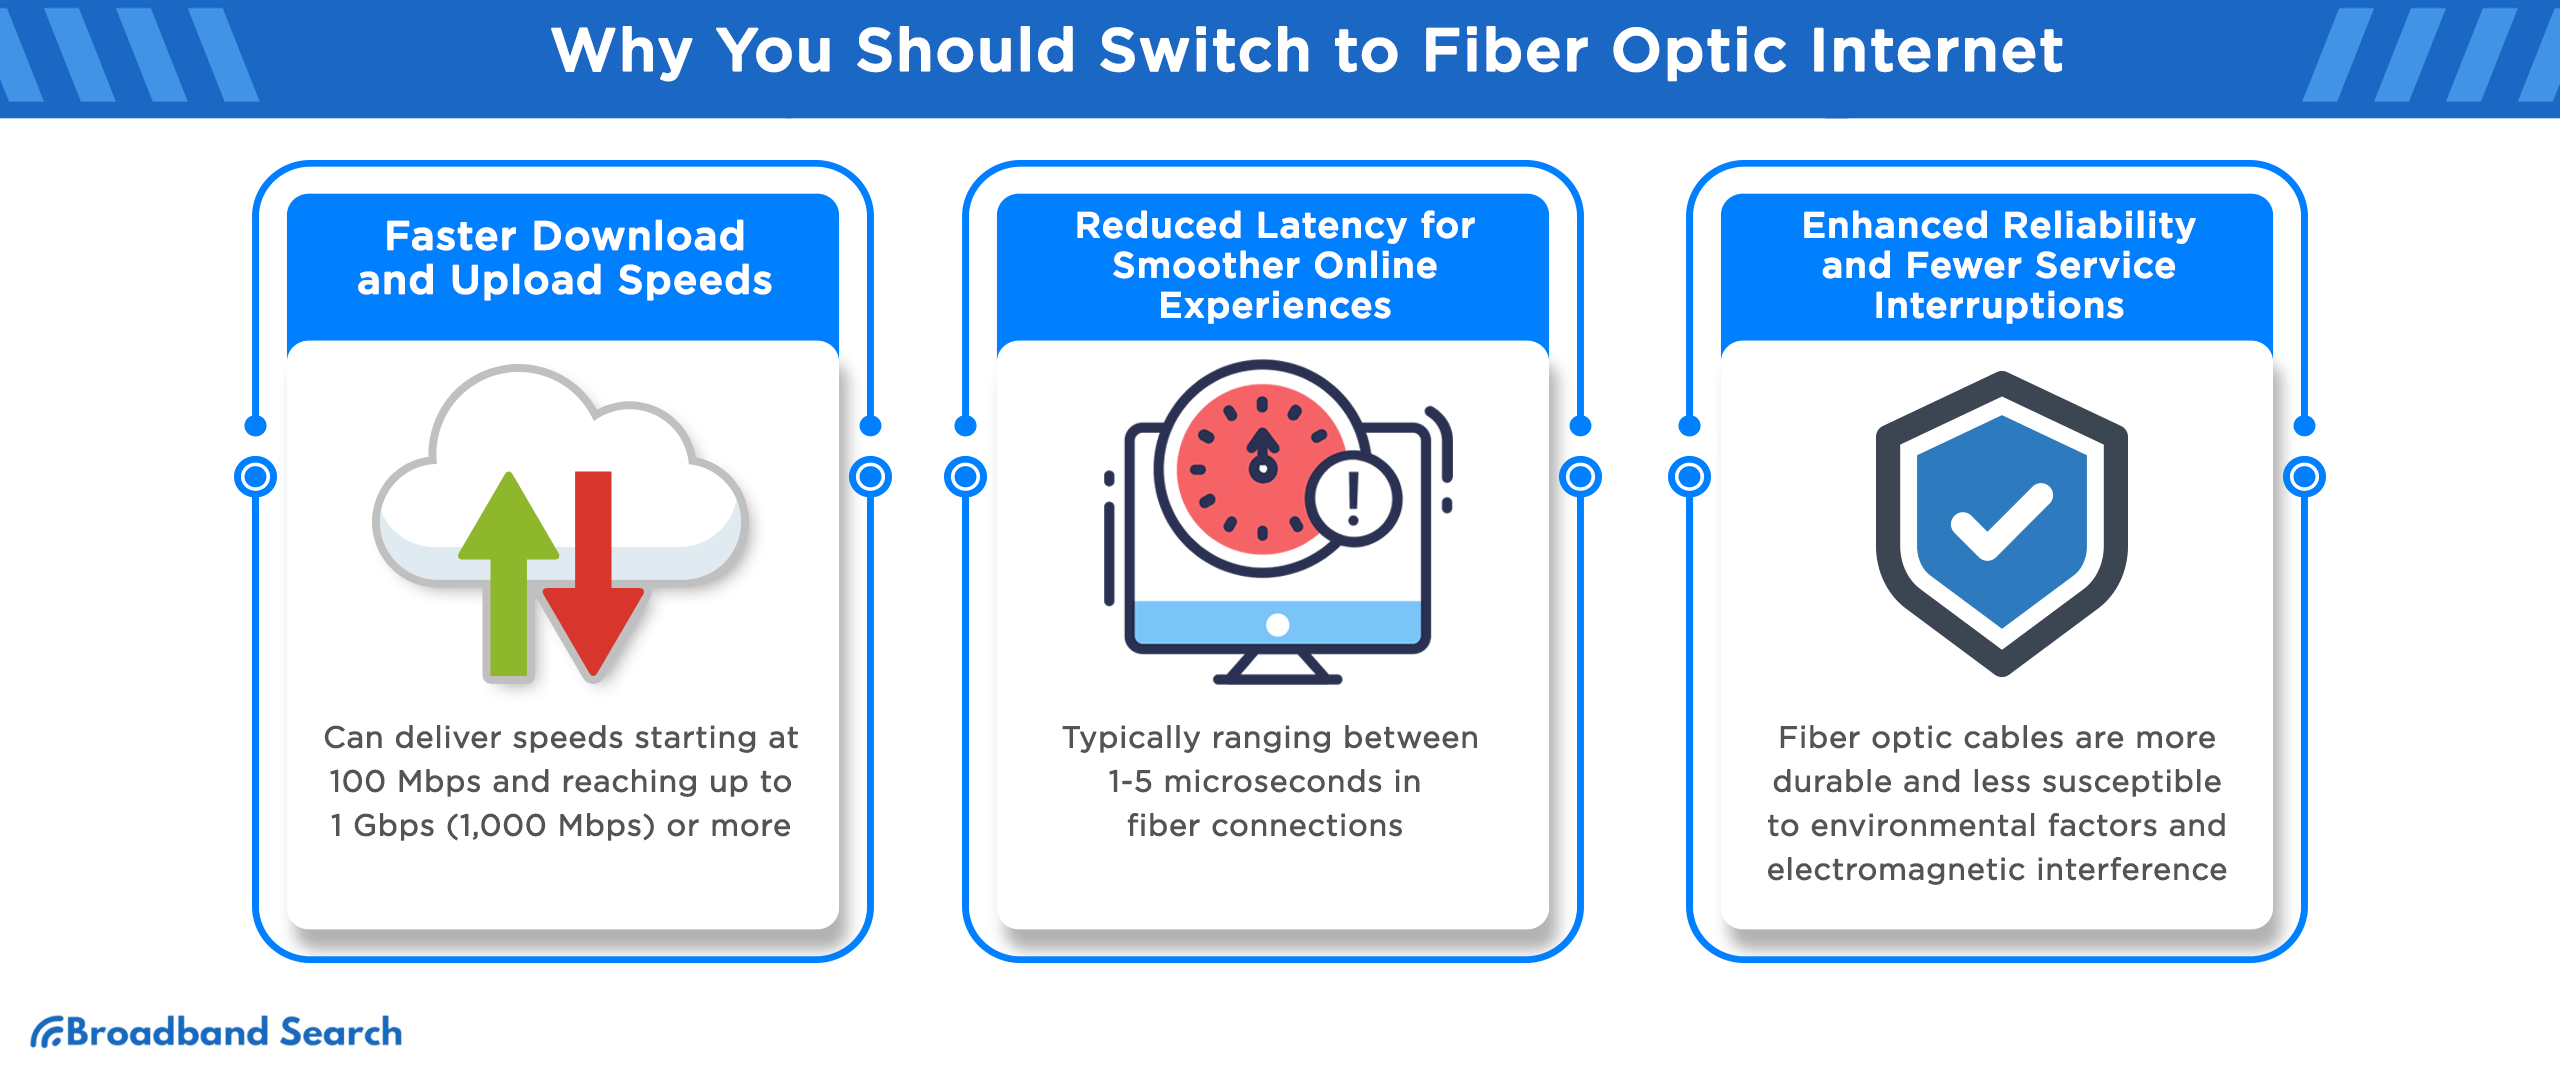 Reasons why should you switch to fiber optic internet